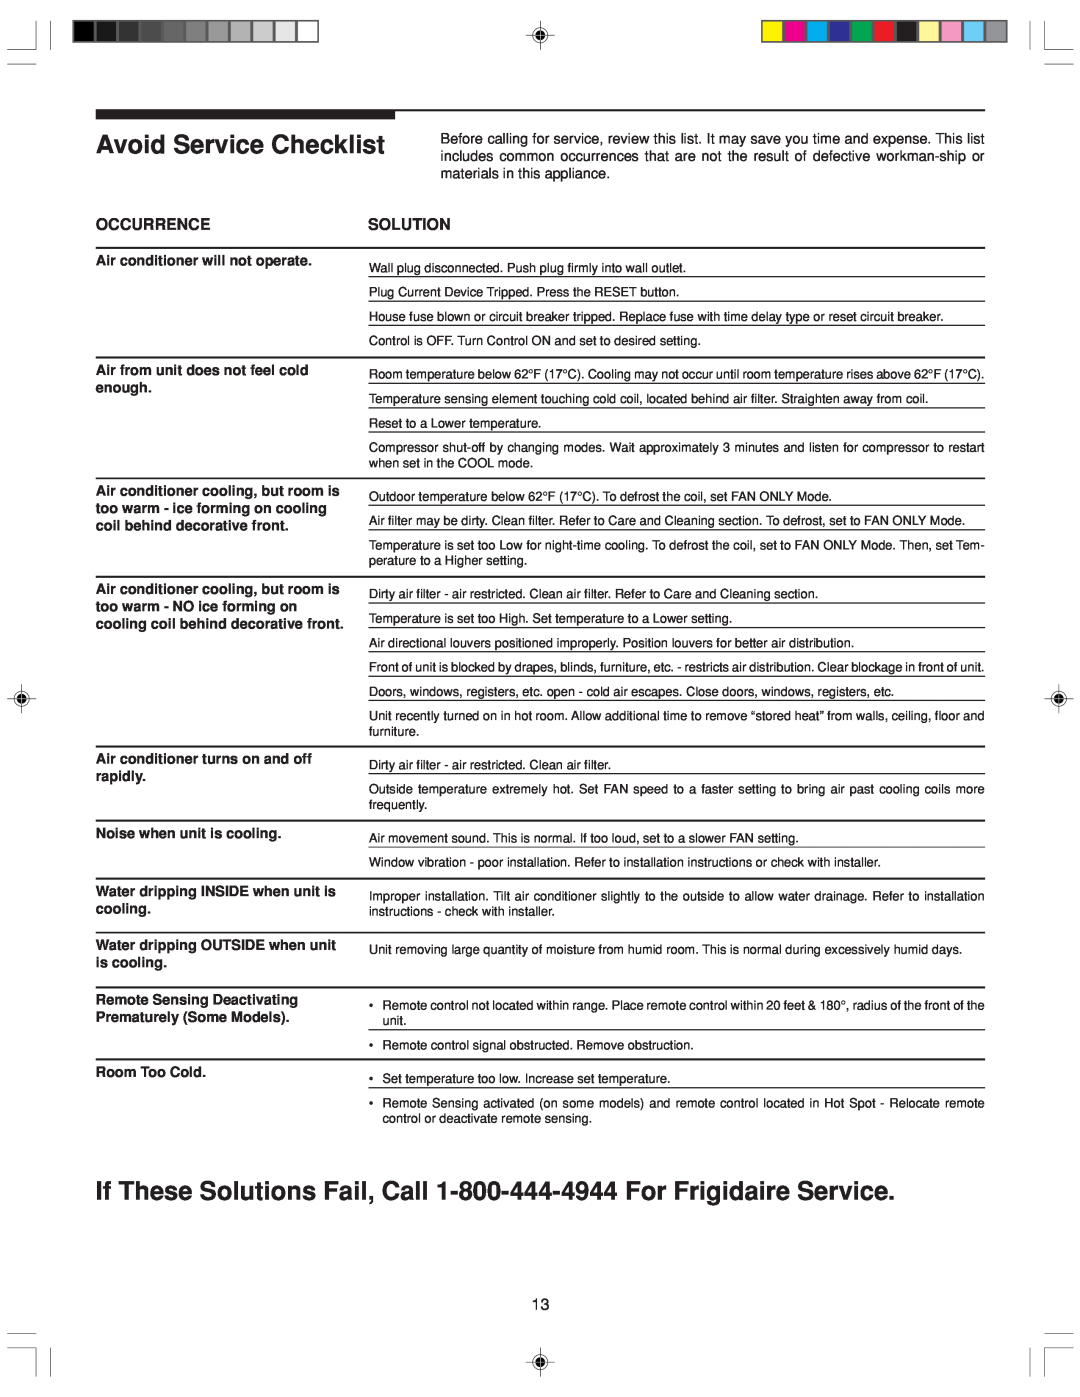 Frigidaire 220211A243 manual Avoid Service Checklist, If These Solutions Fail, Call 1-800-444-4944 For Frigidaire Service 